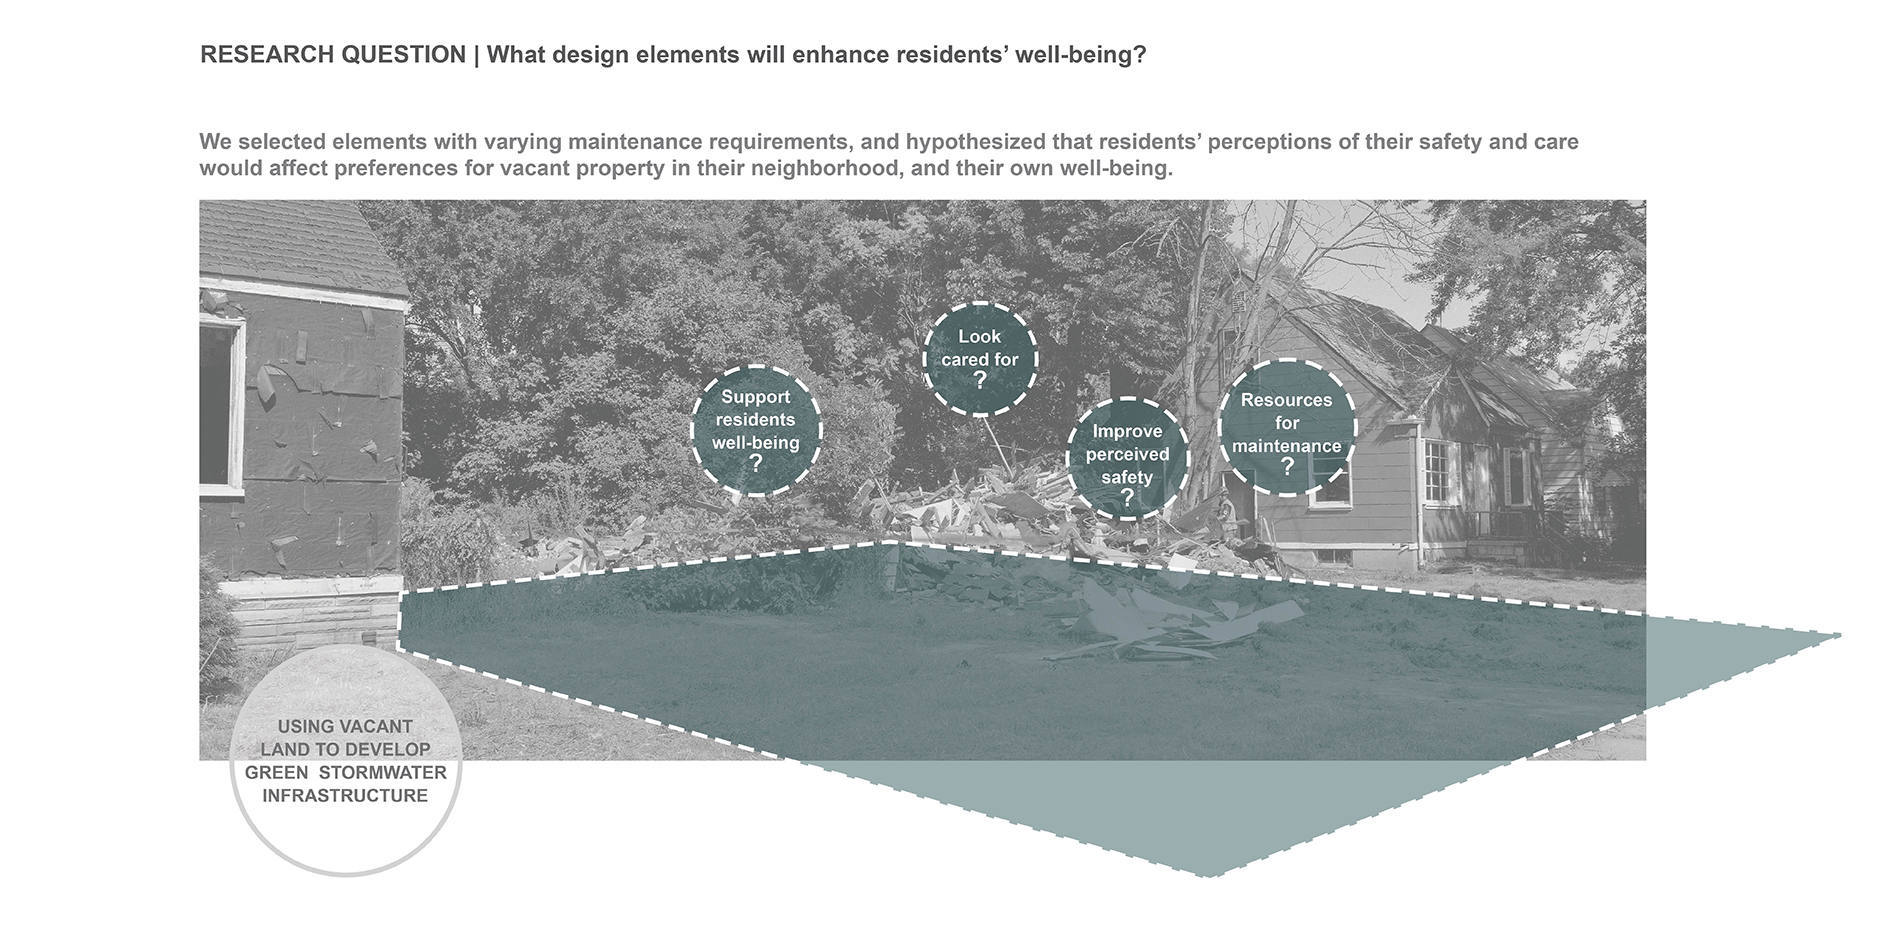 RESEARCH QUESTION: What design elements will enhance residents’ well-being?